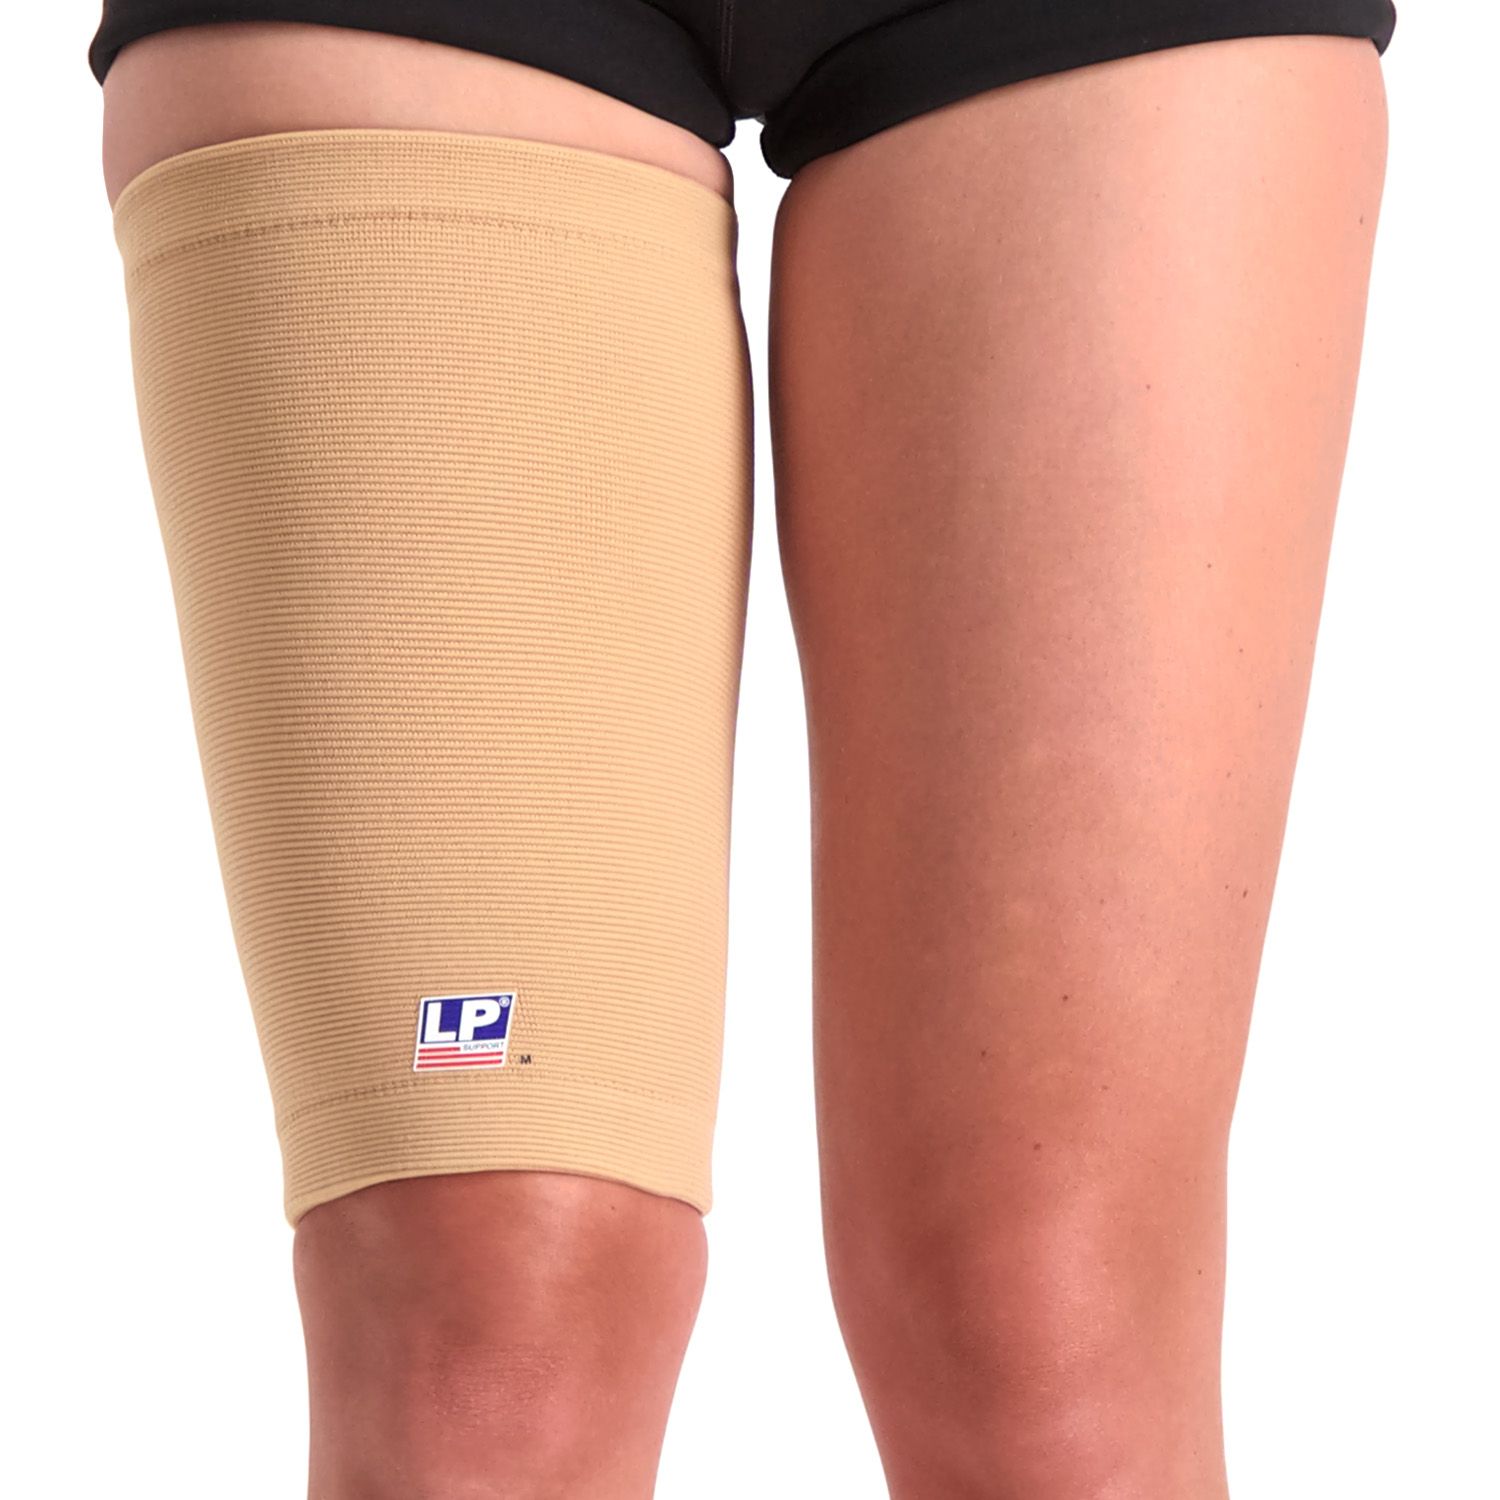 LP Support Thigh Support